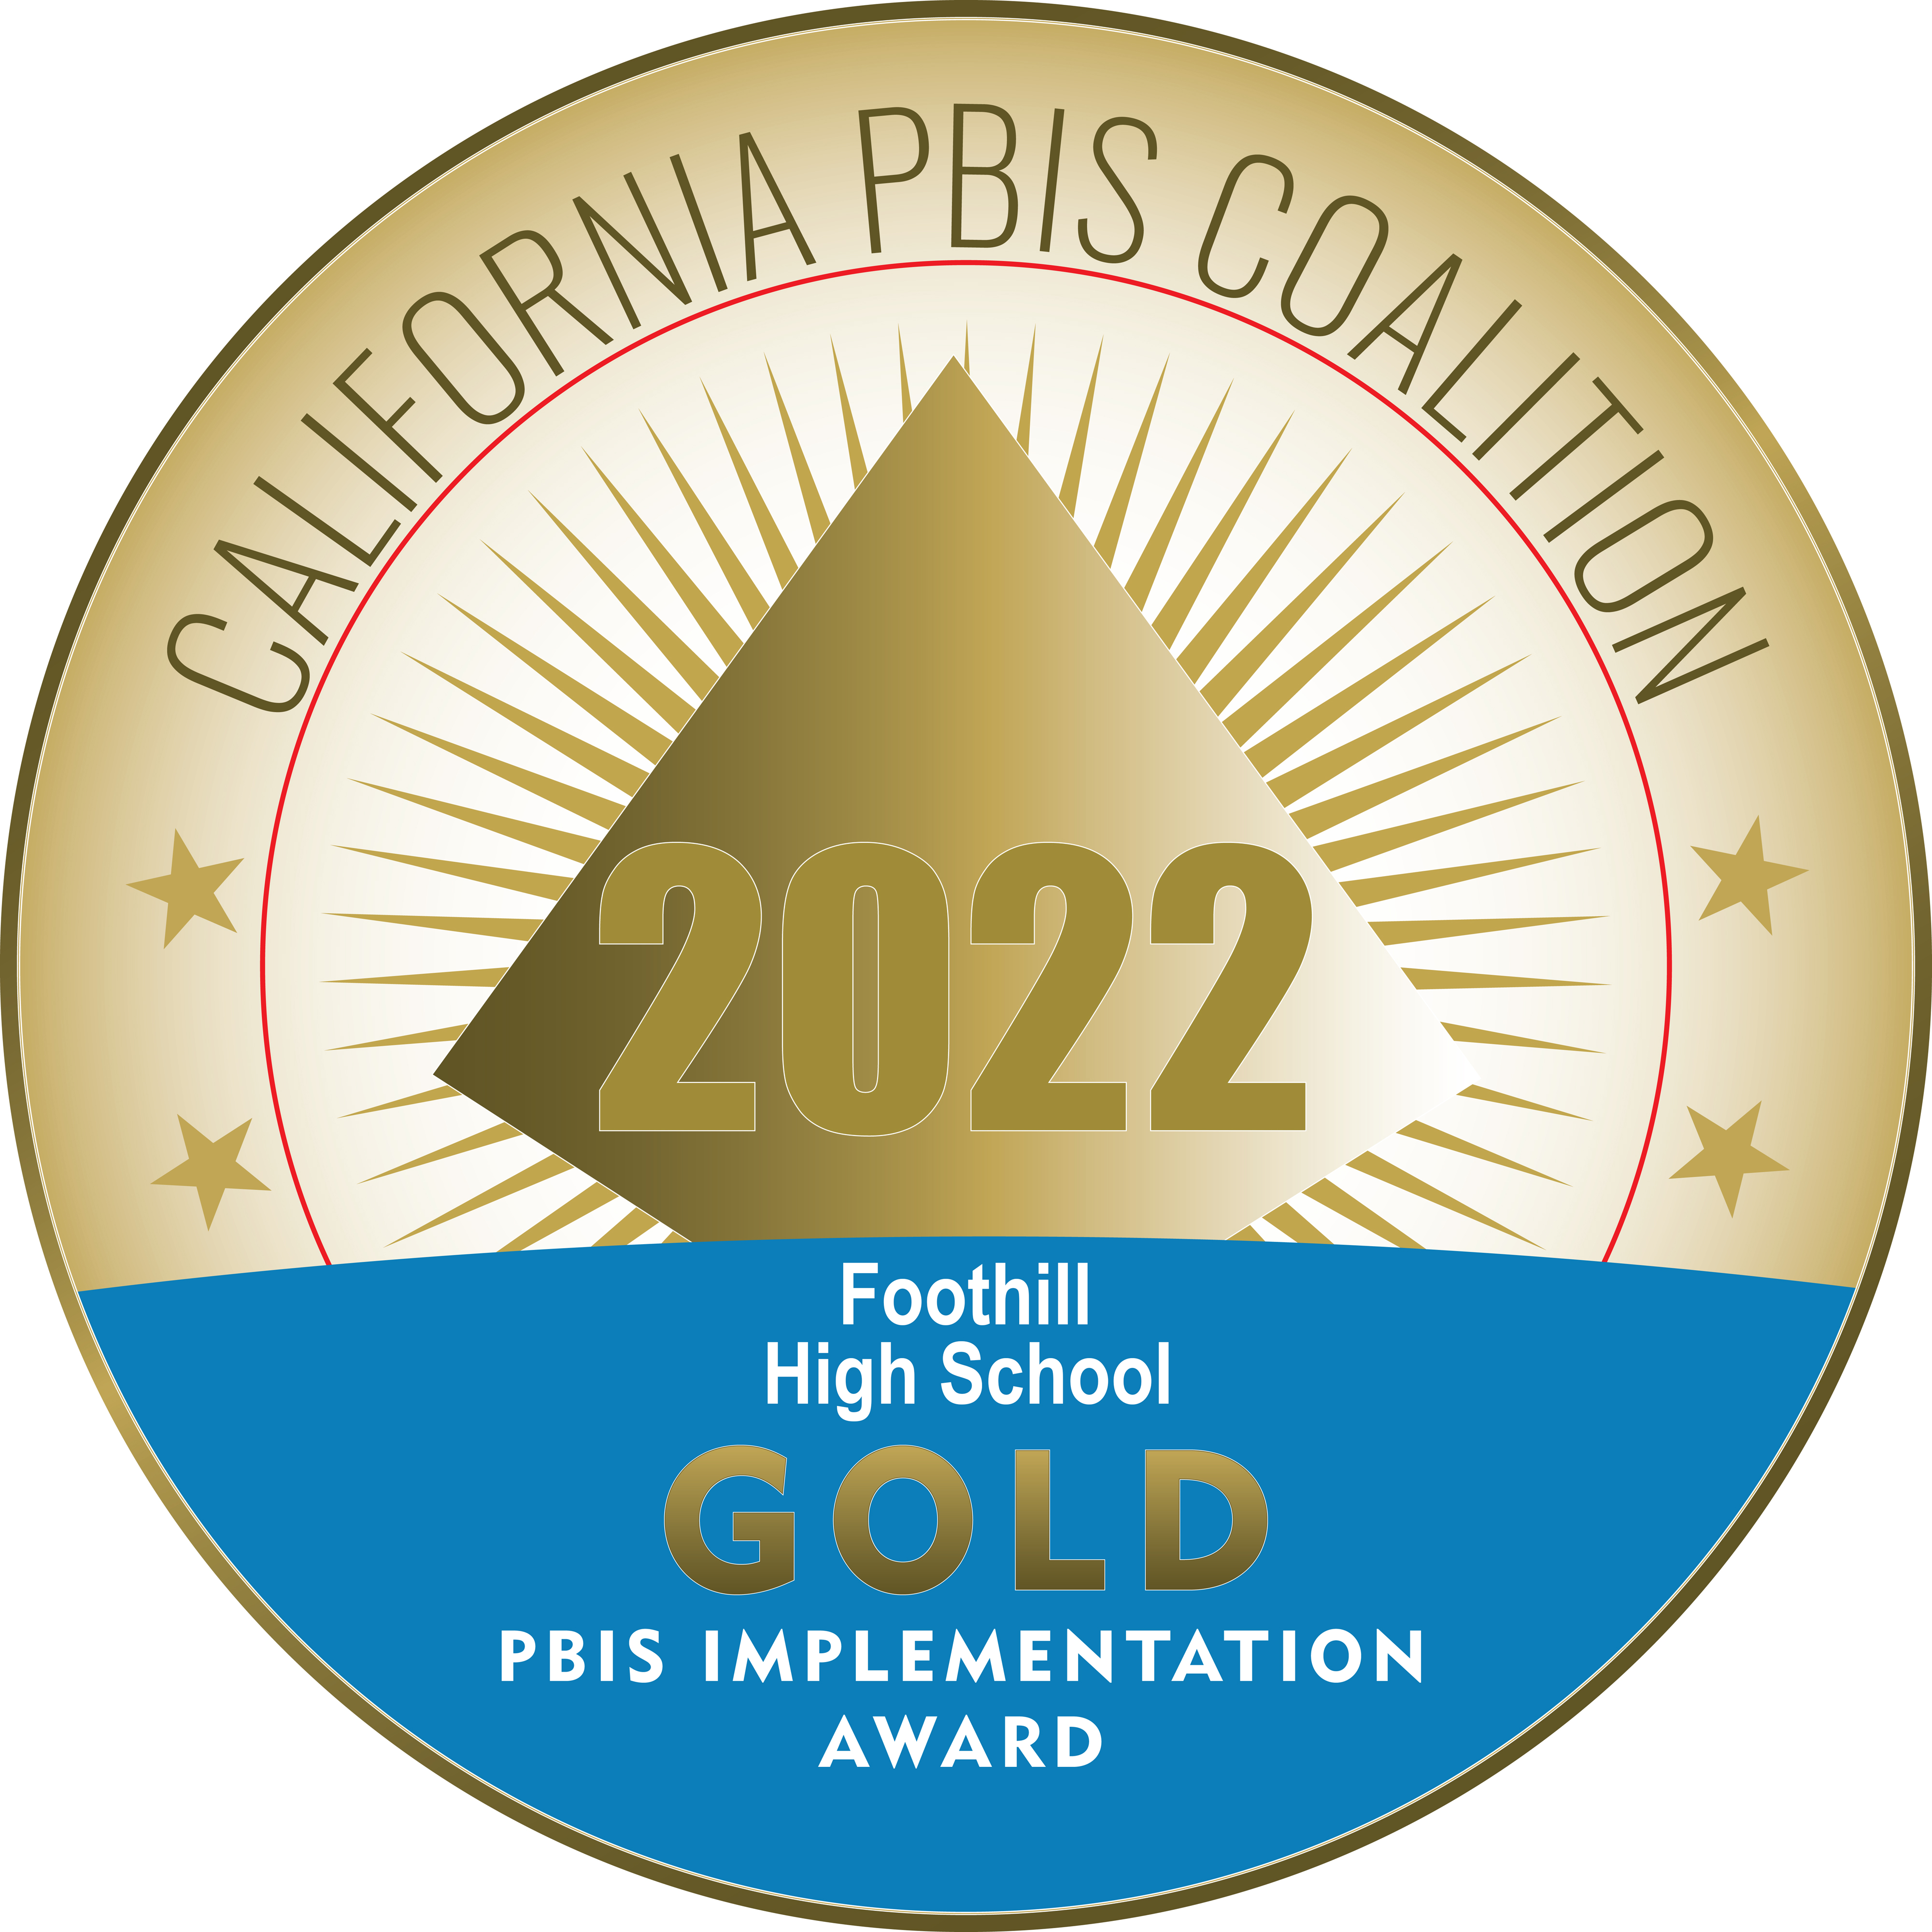 2021-2022 Gold Award from the California PBIS Coalition.